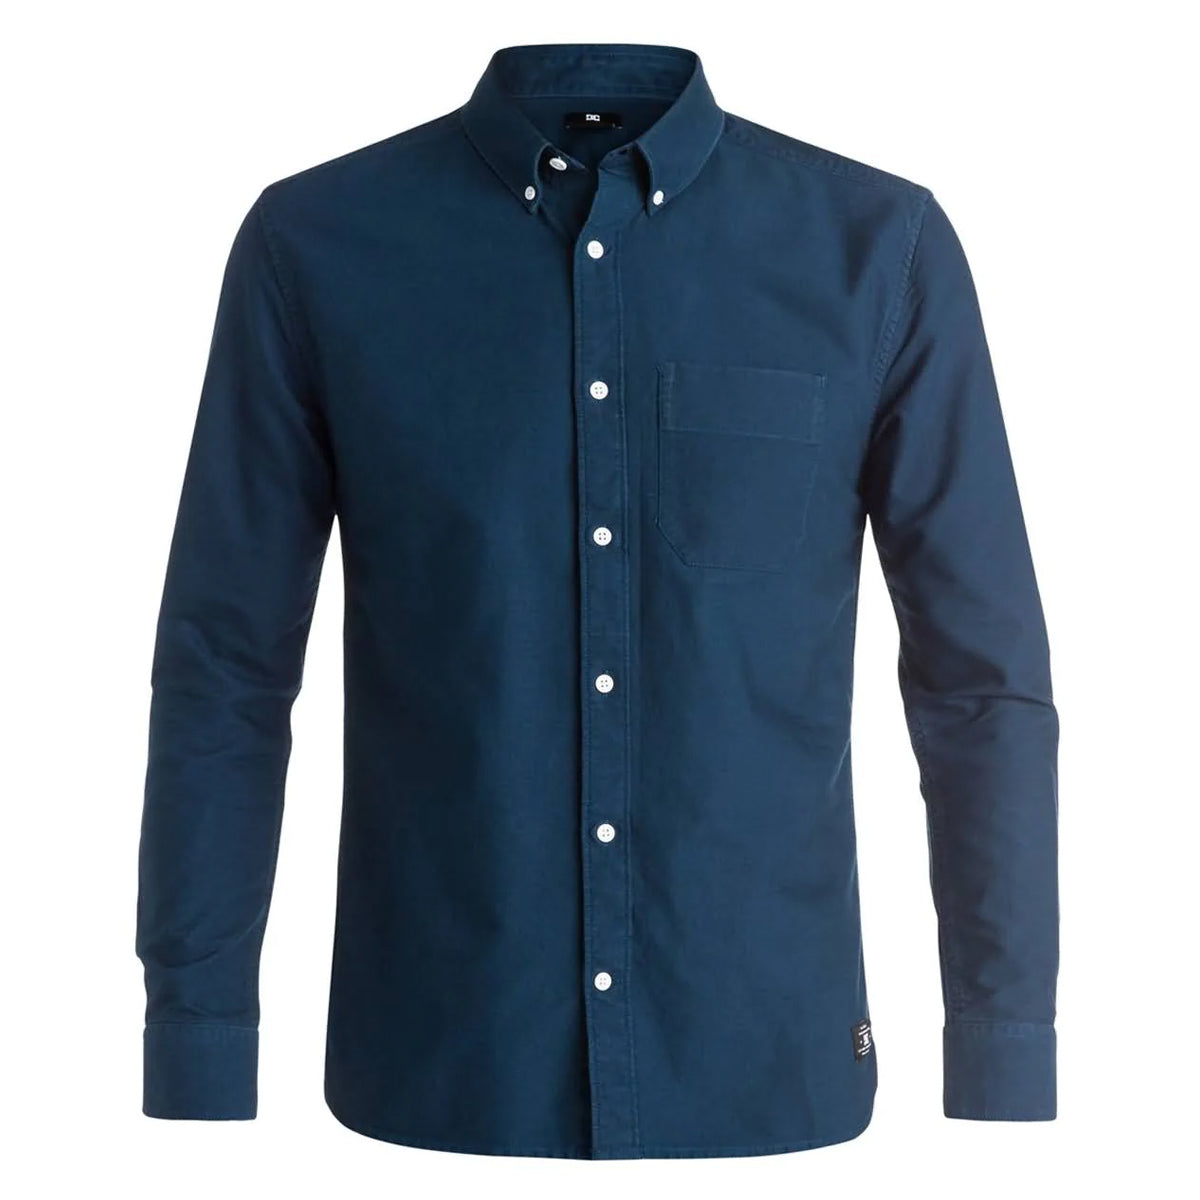 DC Oxford Men's Button Up Long-Sleeve Shirts